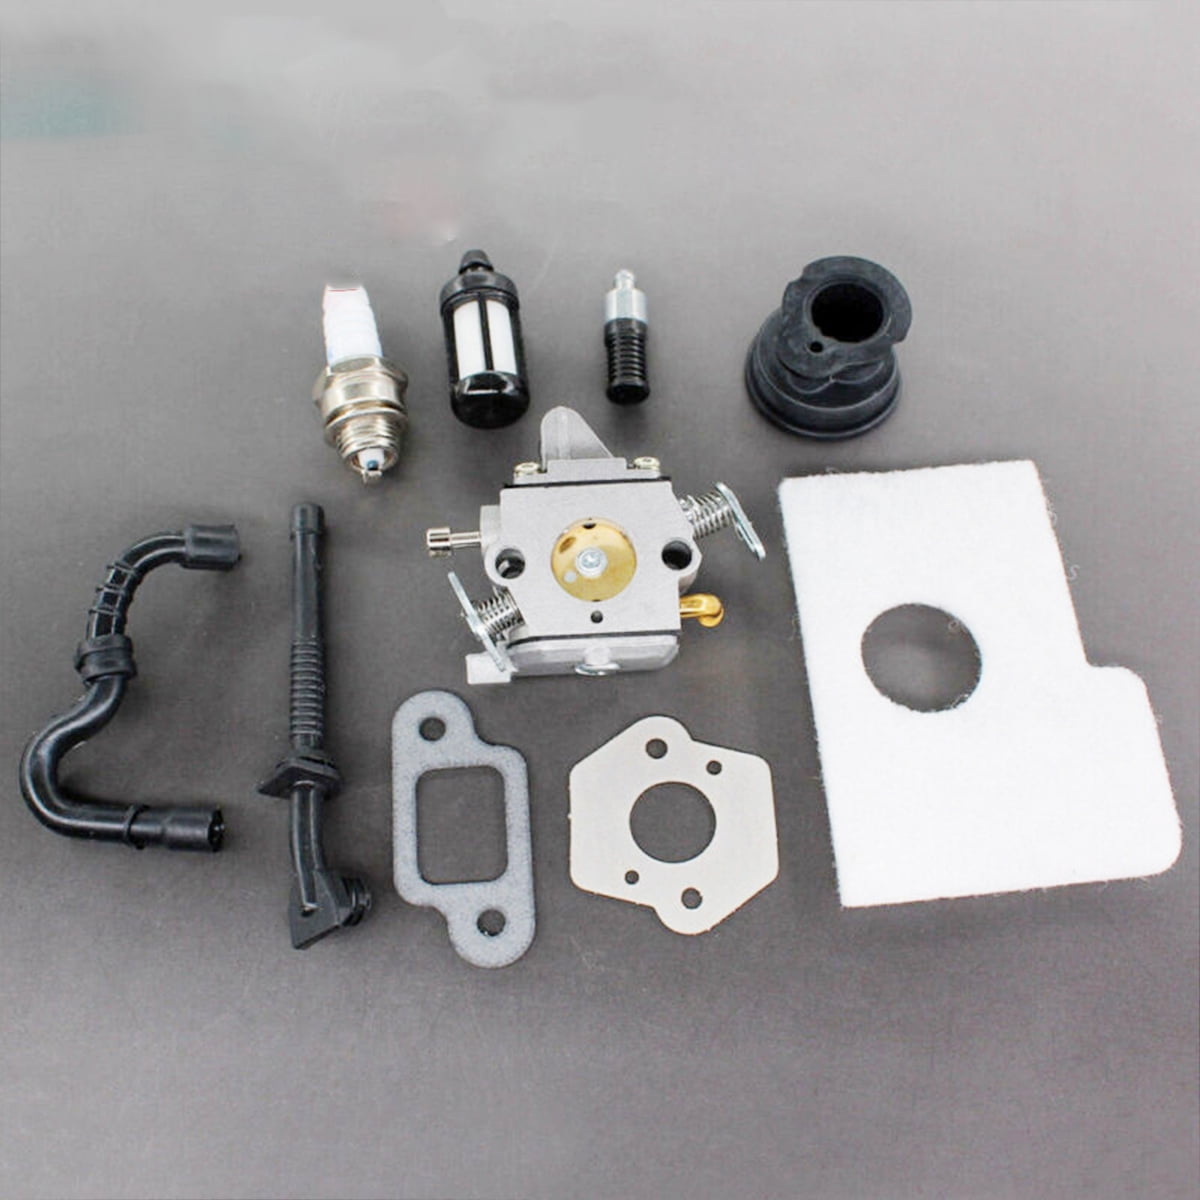 Carburetor Tune Up Kit Accessories For Stihl MS170 MS180 MS170C MS180C Chainsaw